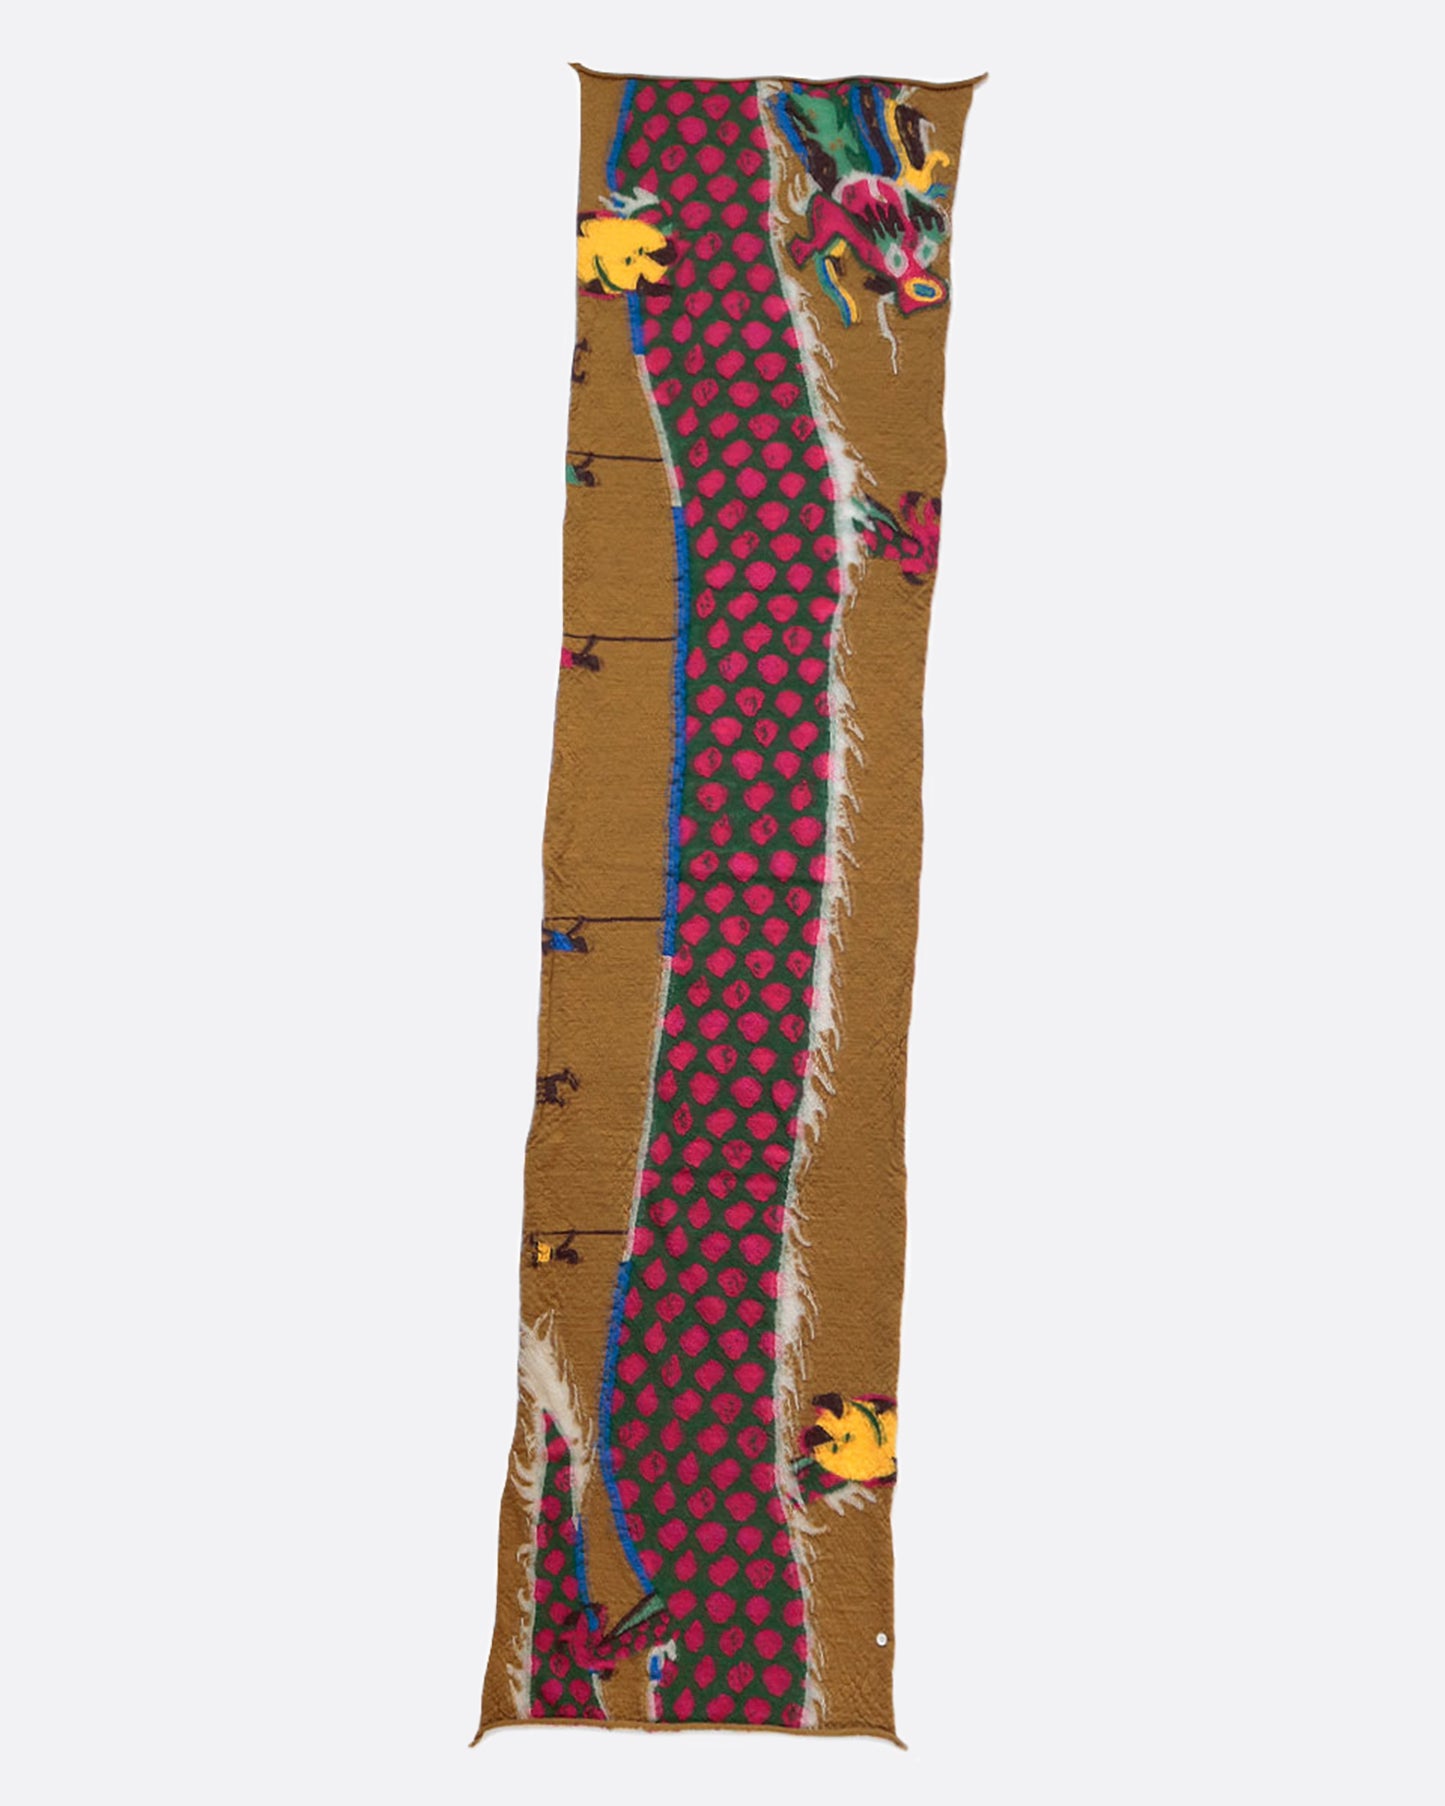 A wool scarf featuring a traditional Chinese dragon dance designed using shades of red, blue and mustard.